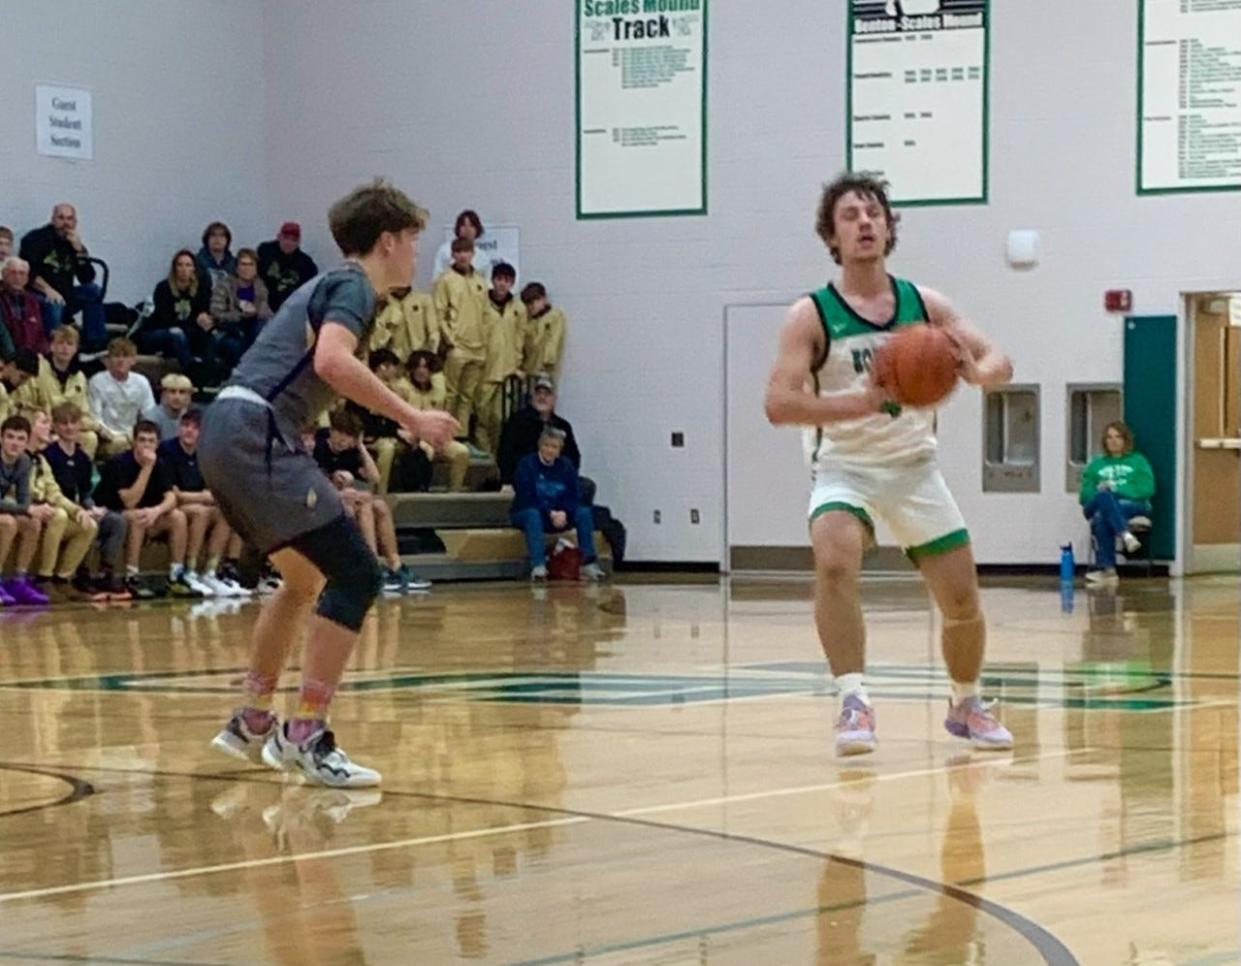 Pecatonica's defense clamped down on No. 5 Scales Mound in the second half of an 81-76 NUIC inter-division game Thursday night.